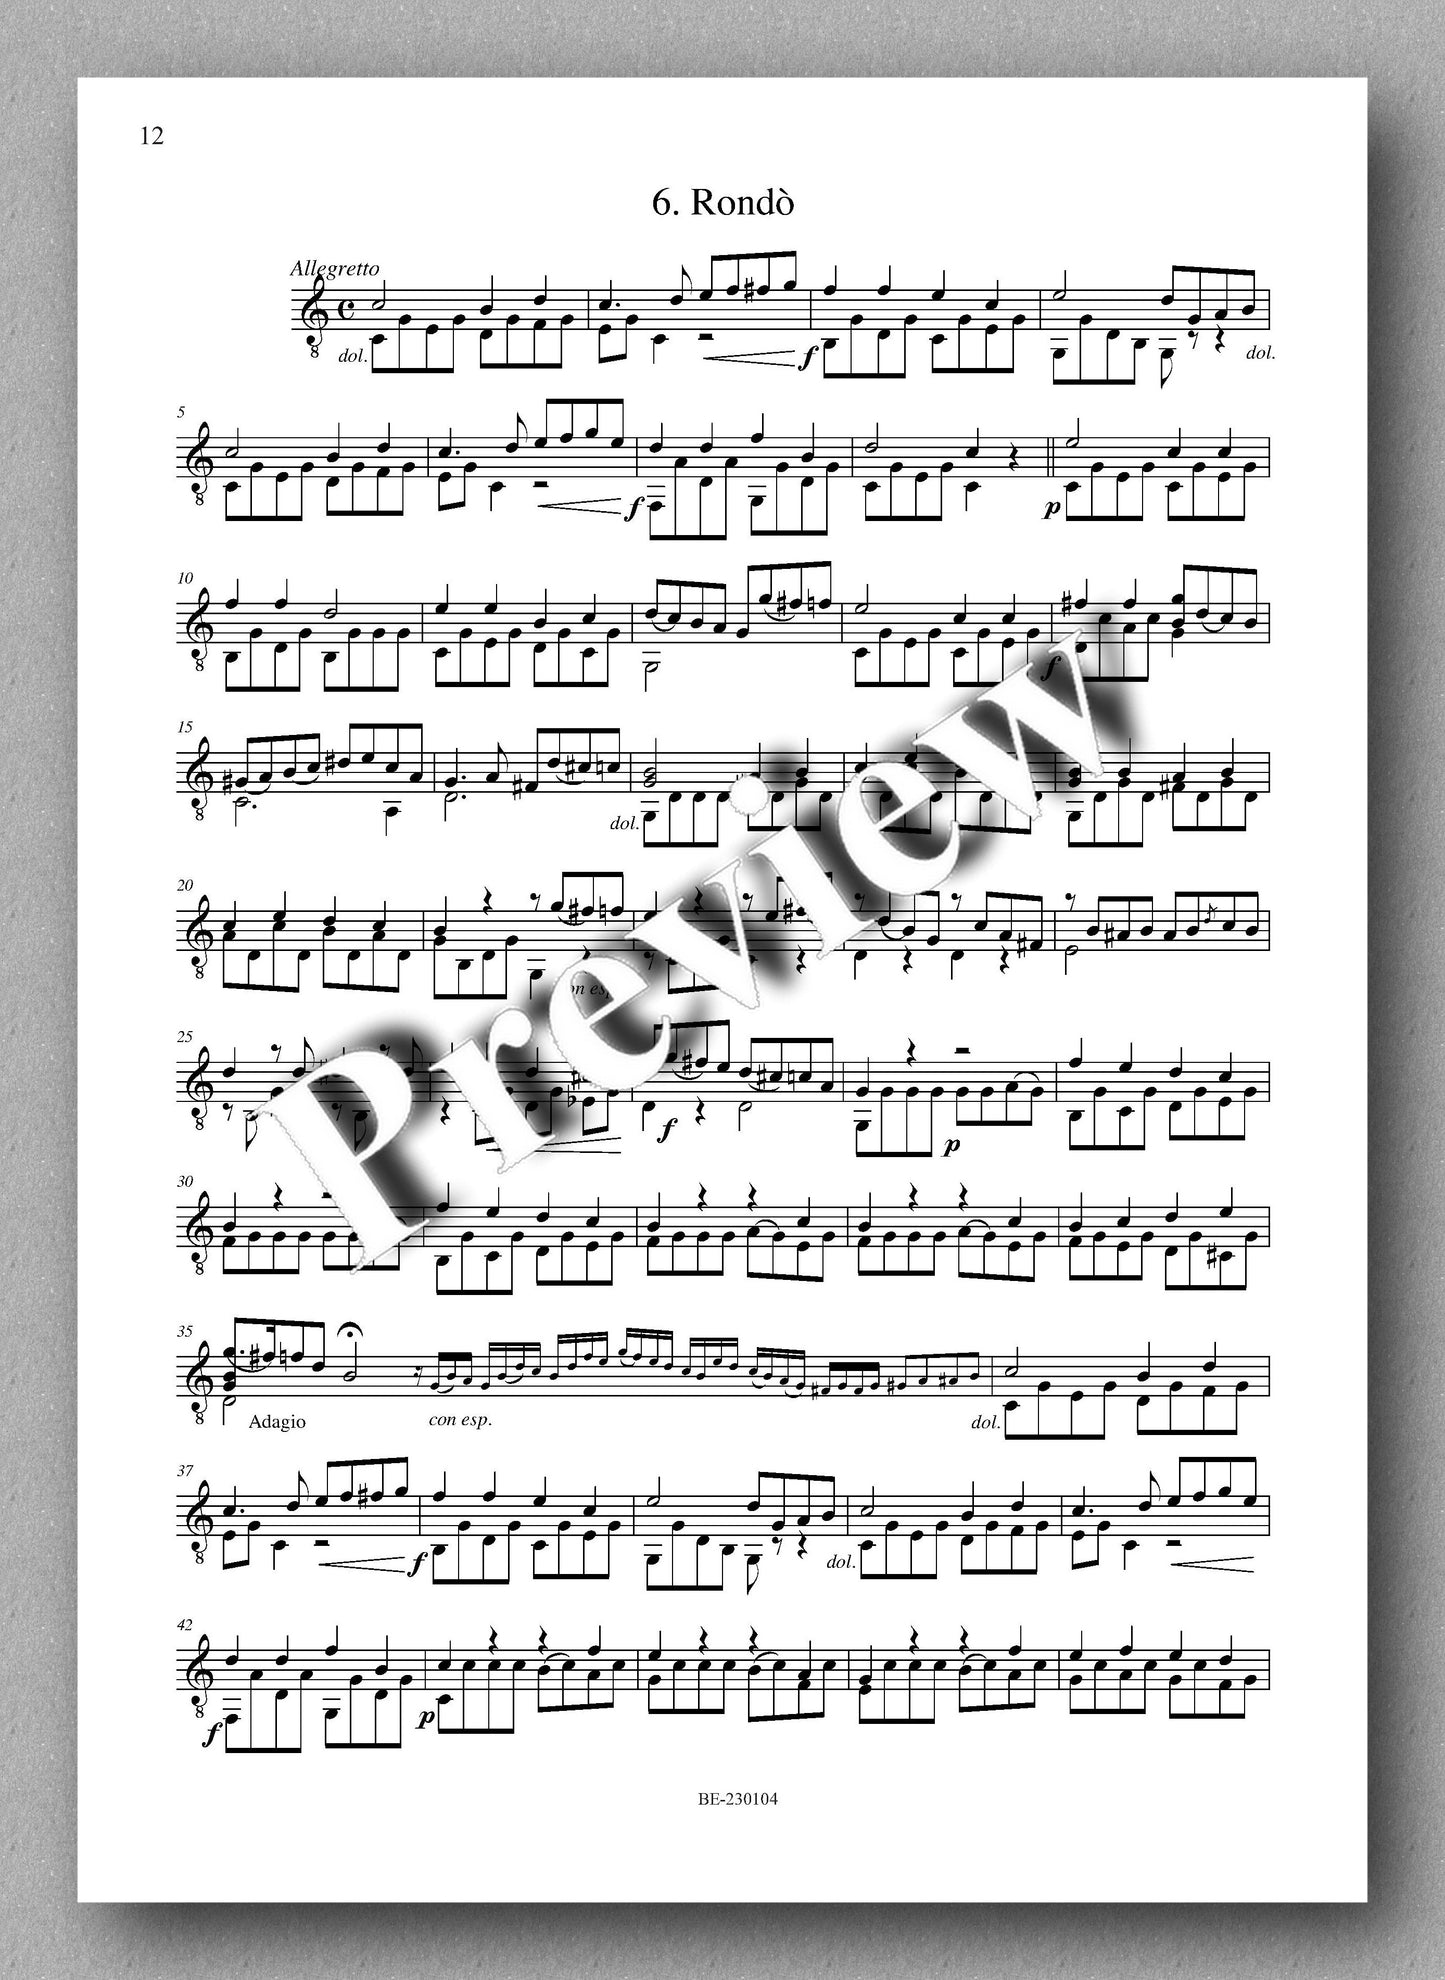 Molino, Collected Works for Guitar Solo, Vol. 16 - preview of the music score 3